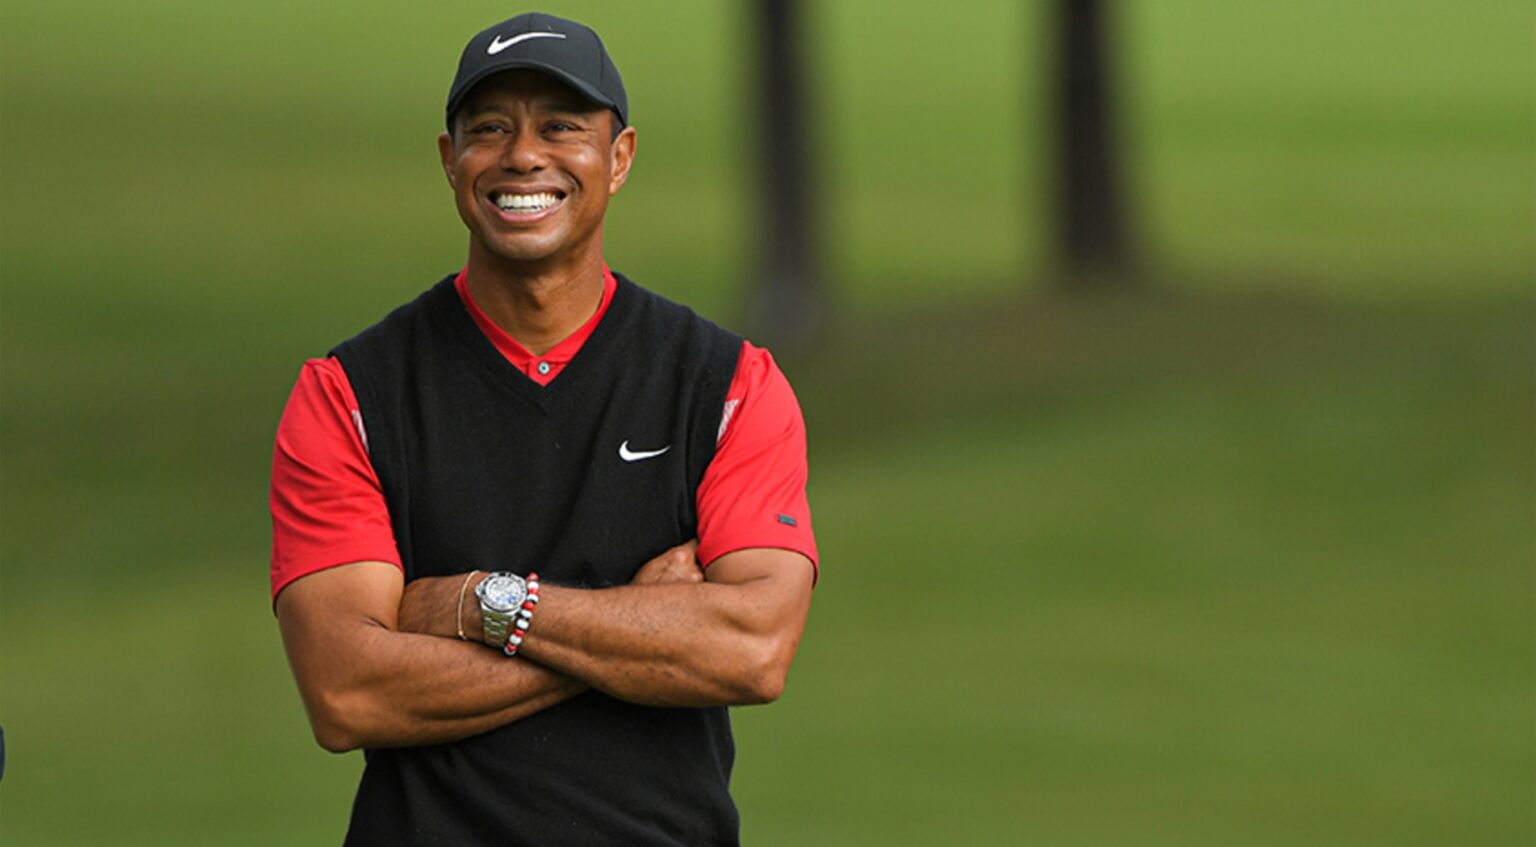 Even now with the news that Tiger Woods is recovering from his car accident, he may not be out of the rough just yet. What could the black box reveal?